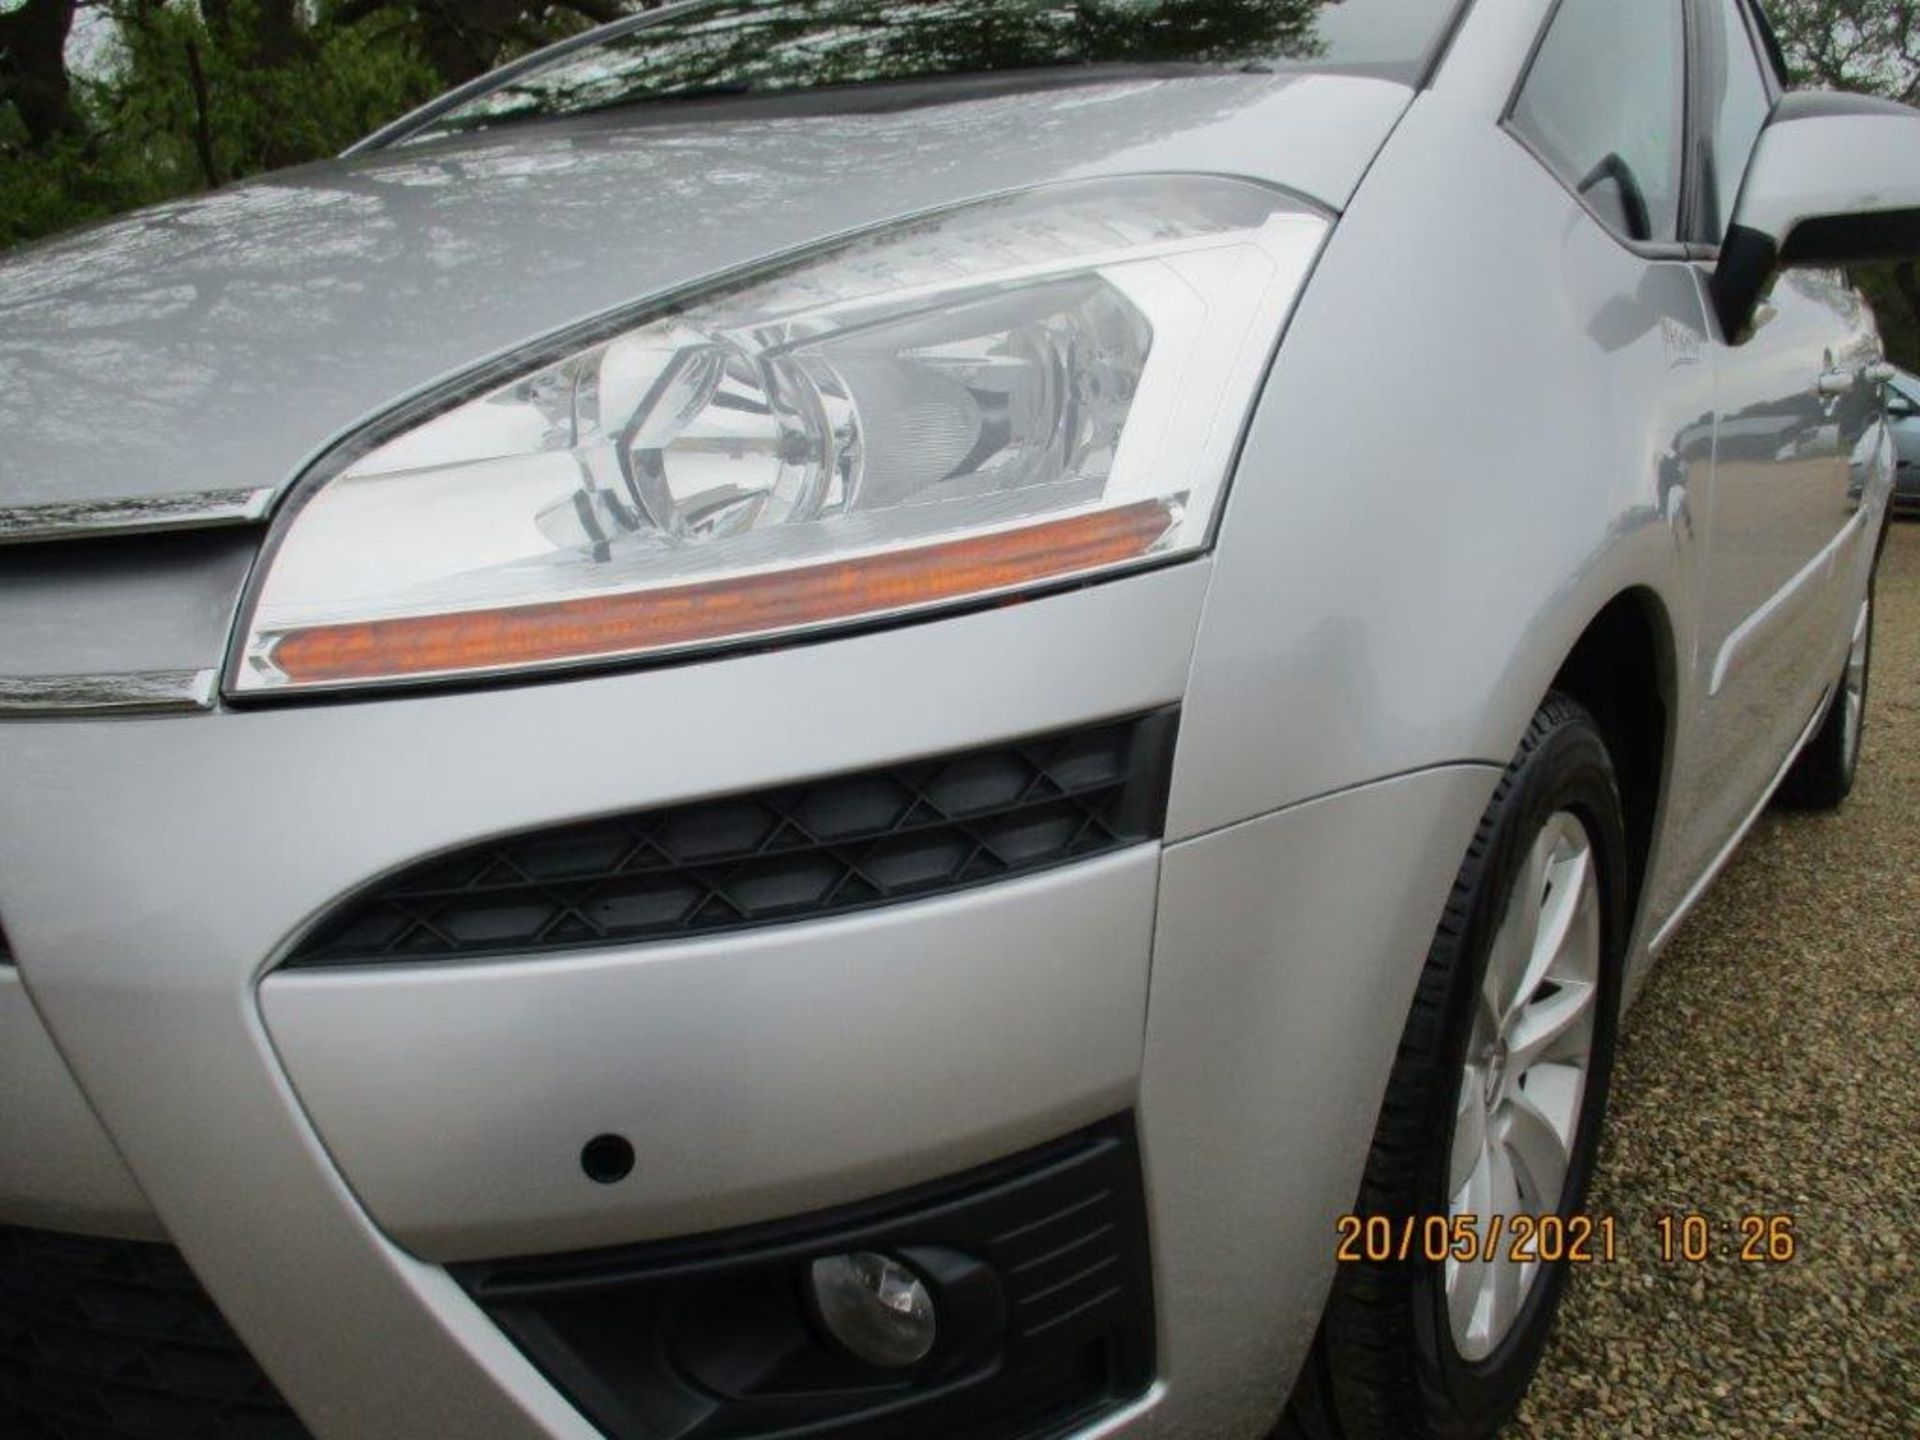 10 10 Citroen C4 Picasso VTR+ HDI - Image 8 of 20